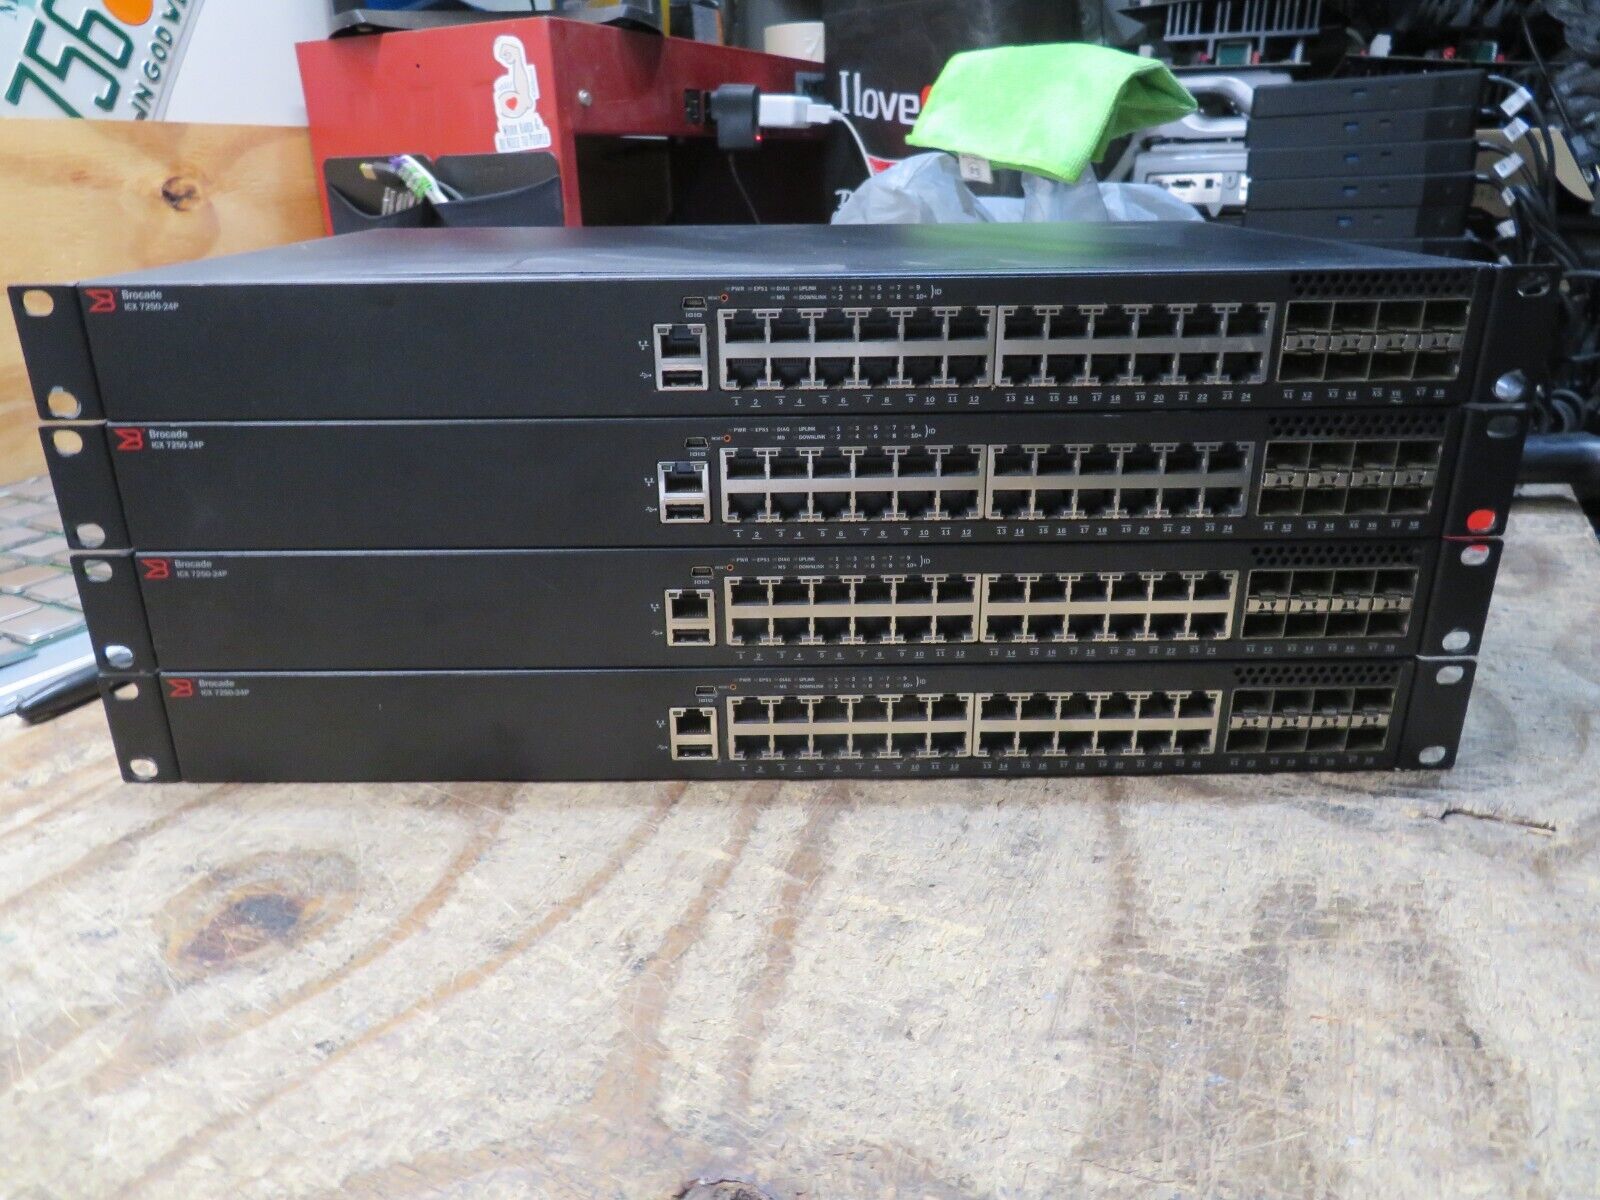 LOT OF 4 Brocade ICX 7250-24P 48-Port Ethernet Switch (ICX7250-24P)